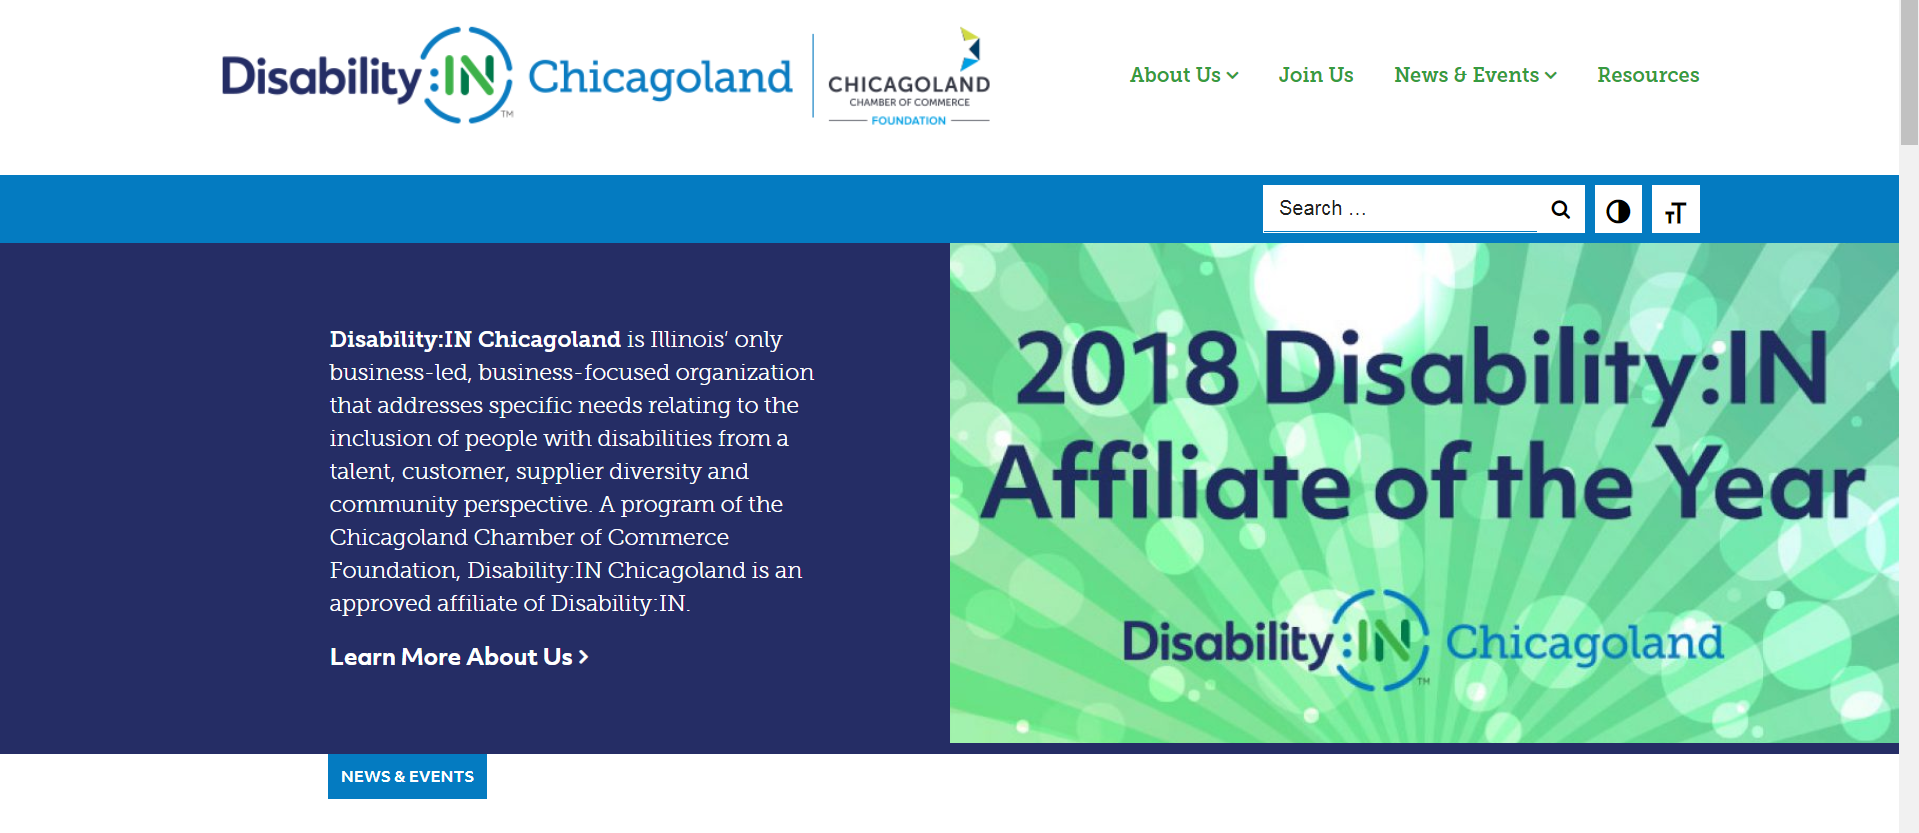 Screenshot of Disability:IN Chicagoland's new website